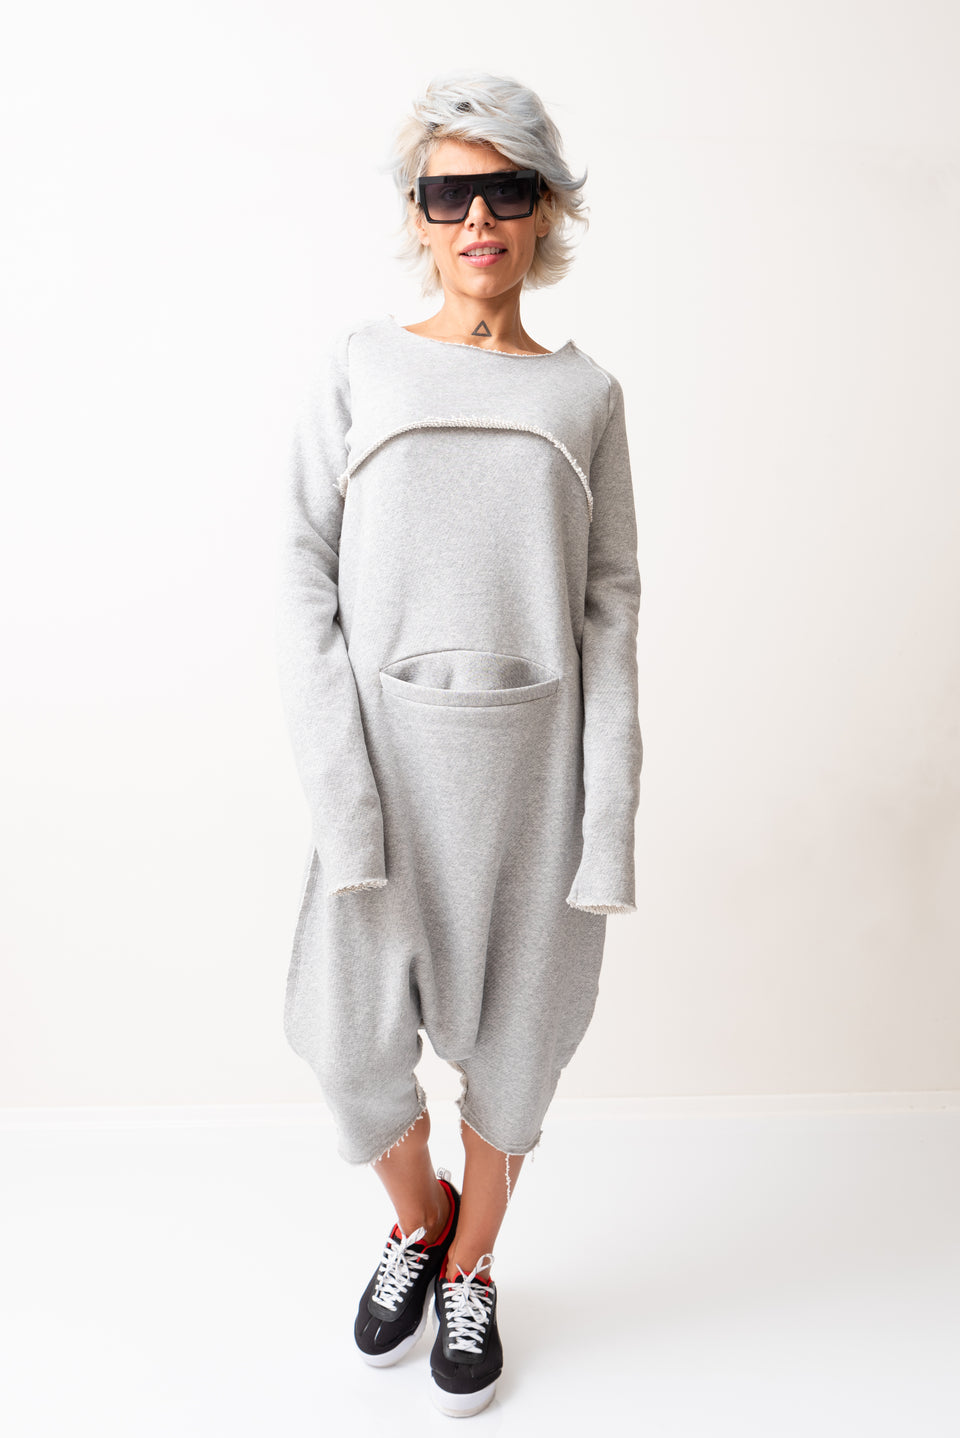 Grey Oversized Sleeveless Jumpsuit Paired with a Top with Long Sleeves - Clothes By Locker Room